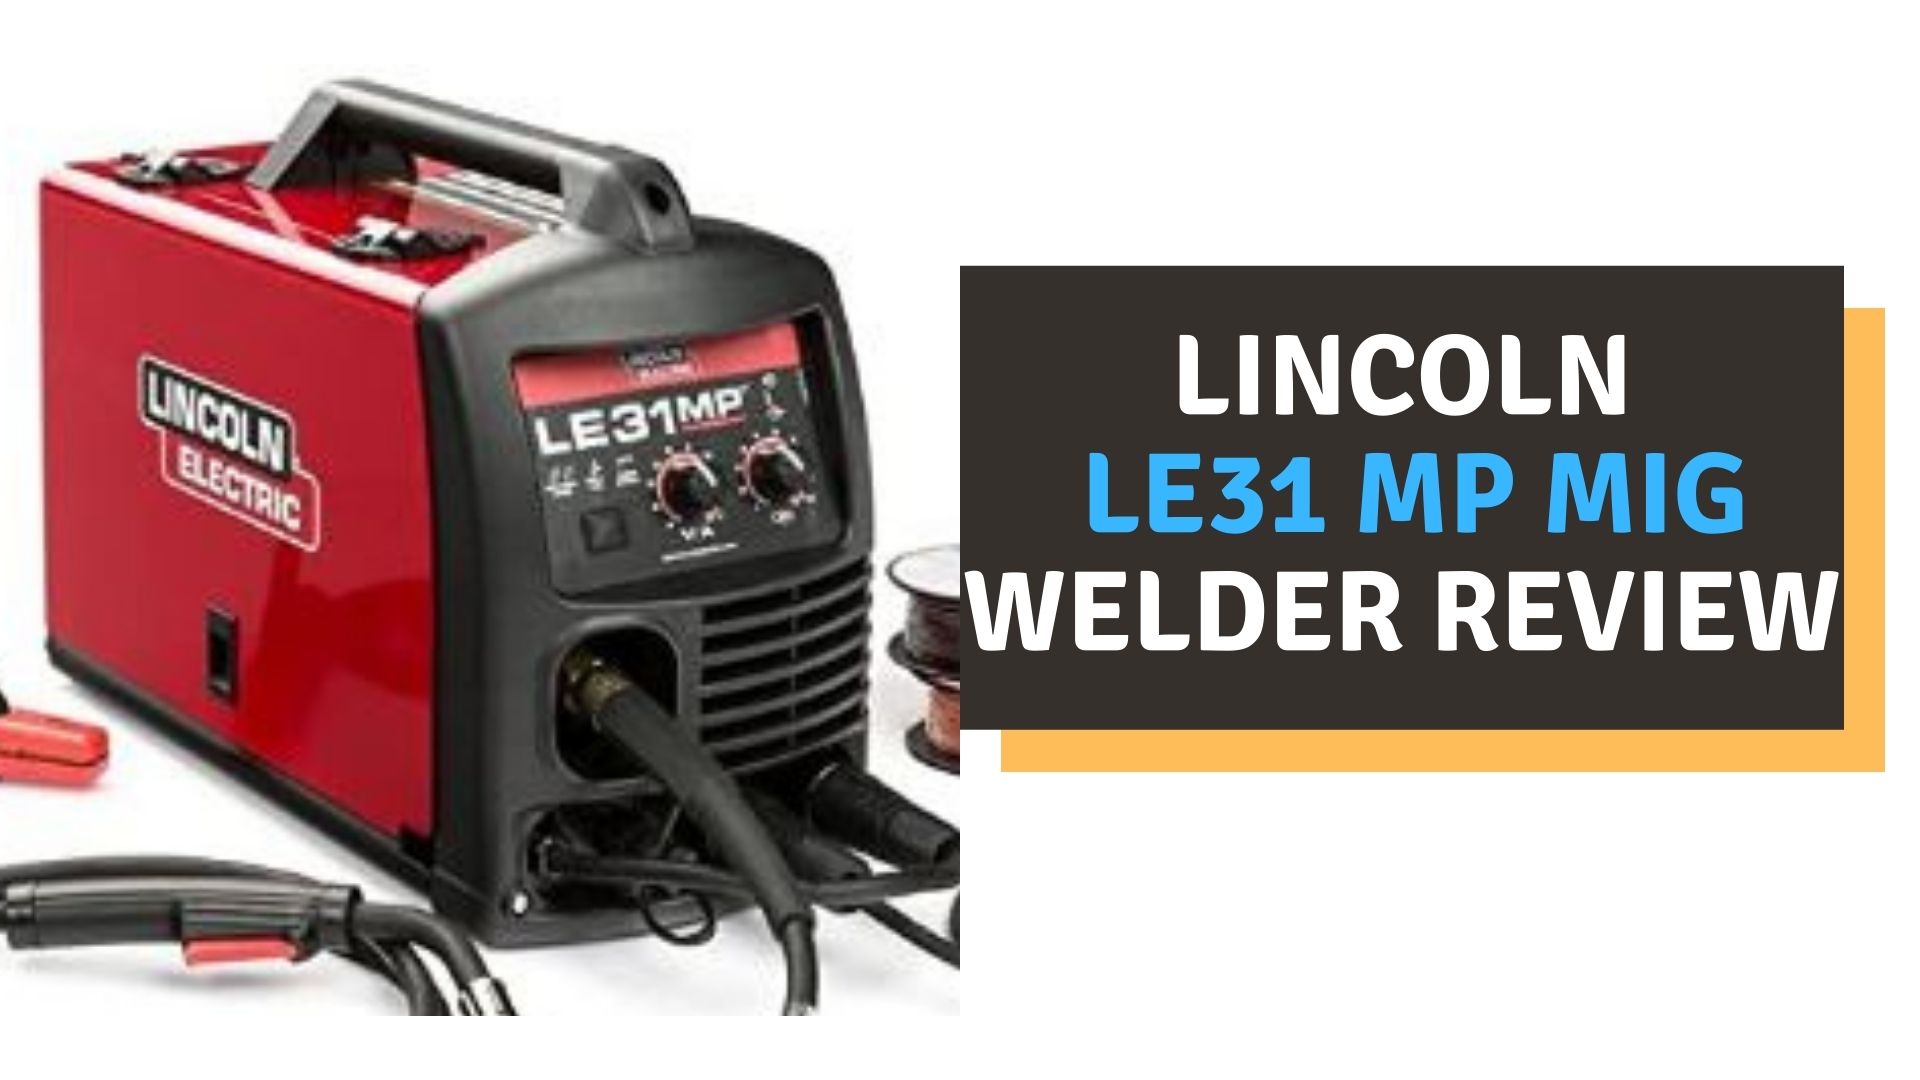 Lincoln LE31 MP MIG Welder Review 2022